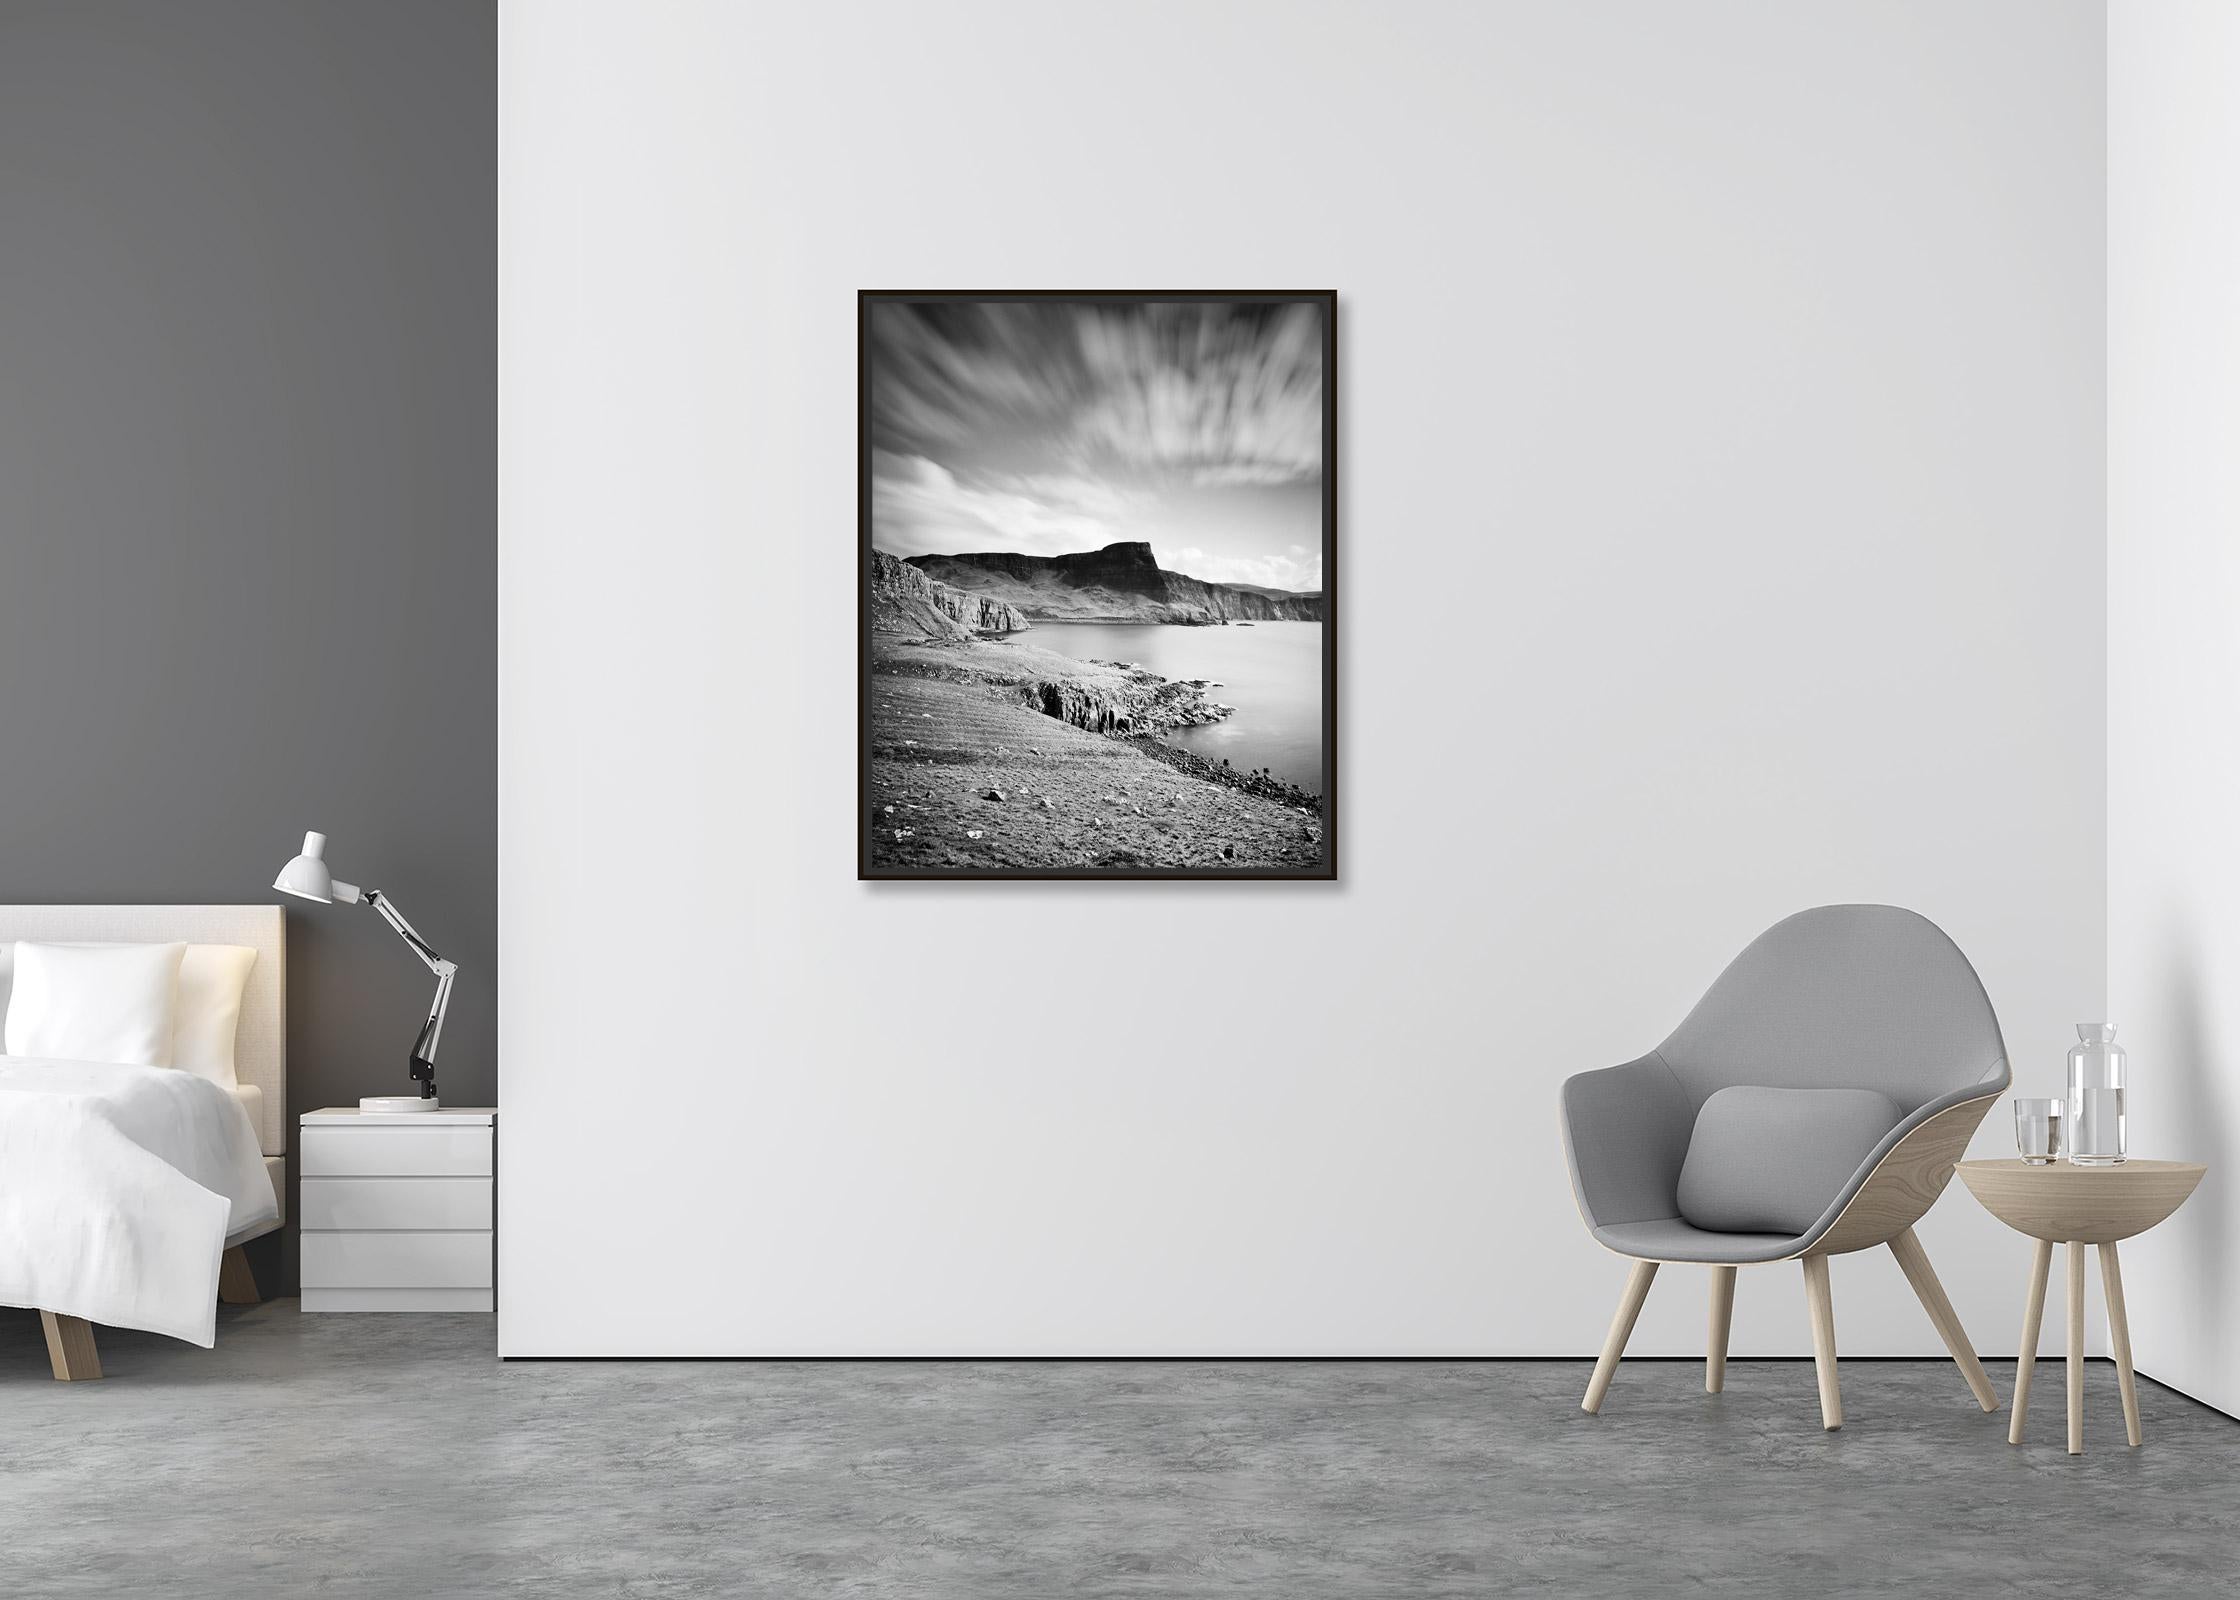 Neist Point, Isle of Sky, Scotland, black and white art photography, landscape - Contemporary Photograph by Gerald Berghammer